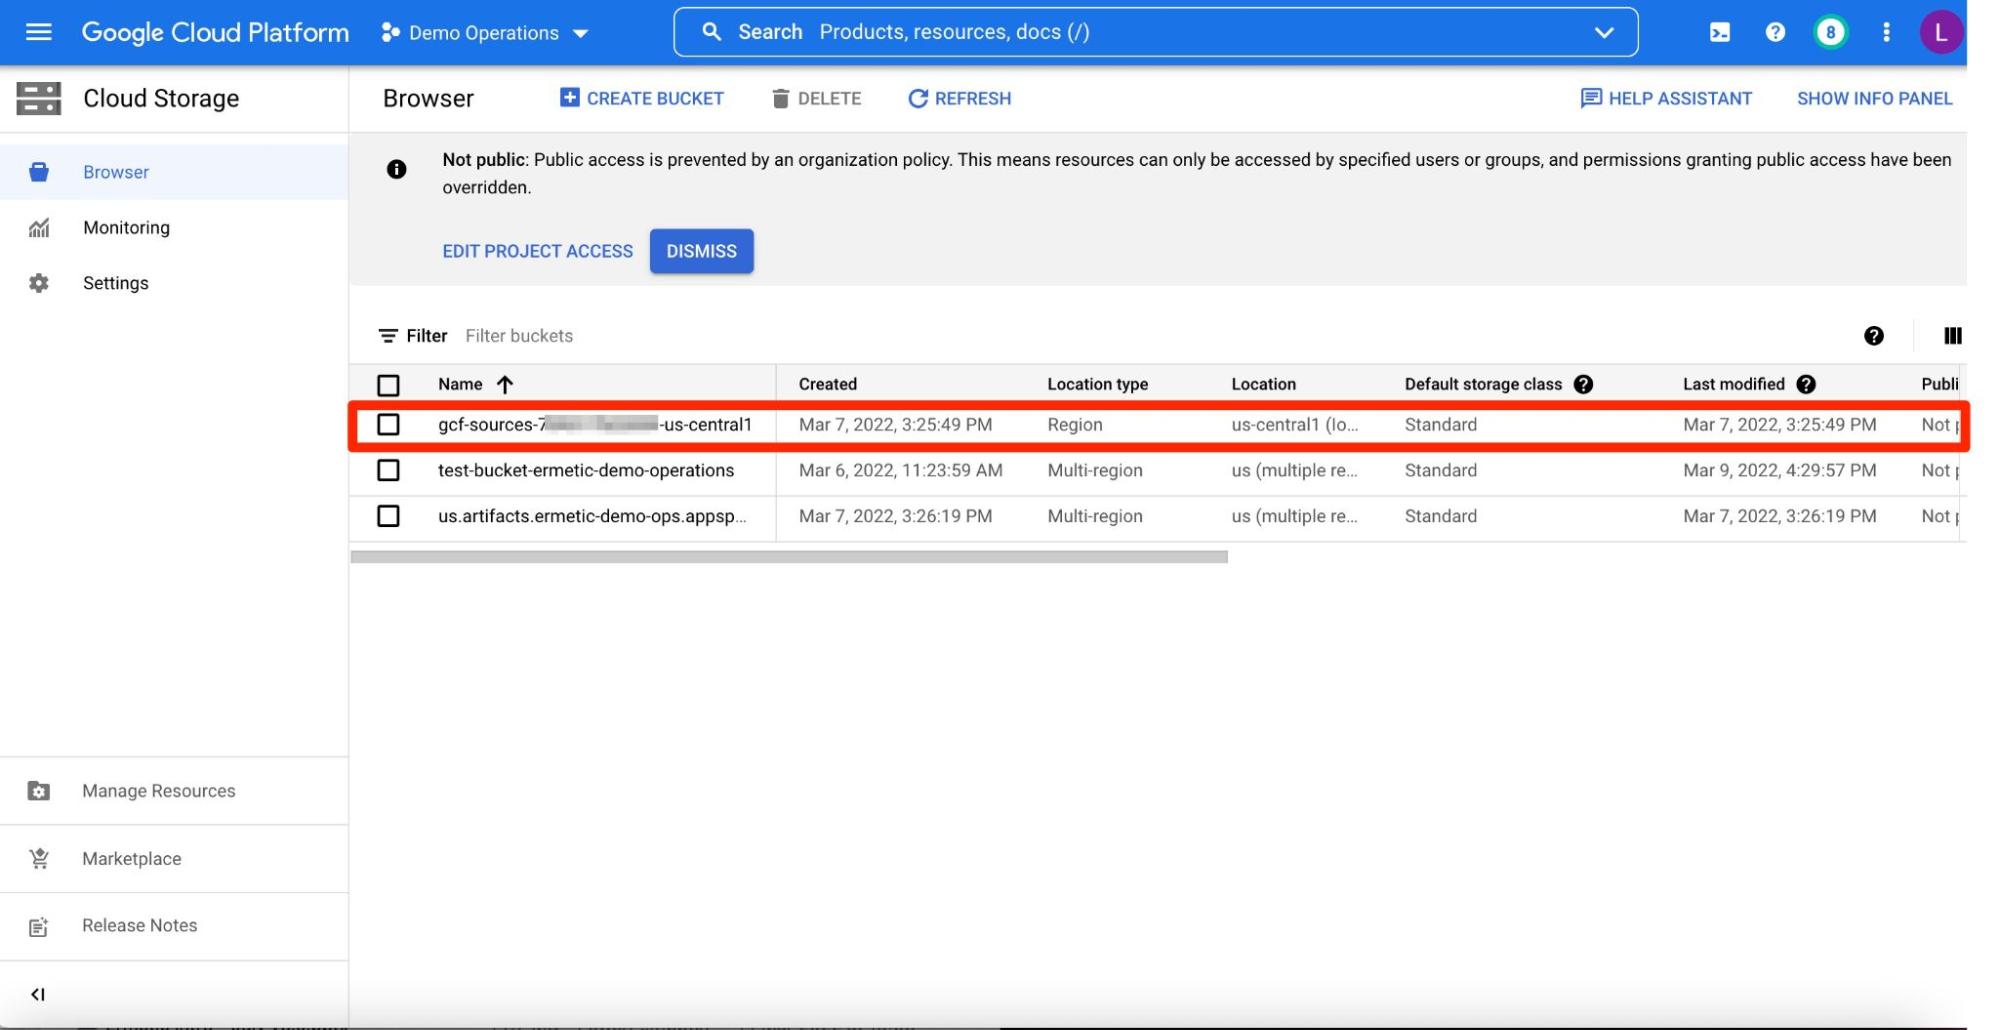 Hidden Risk in the Default Roles of Google-Managed Service Accounts